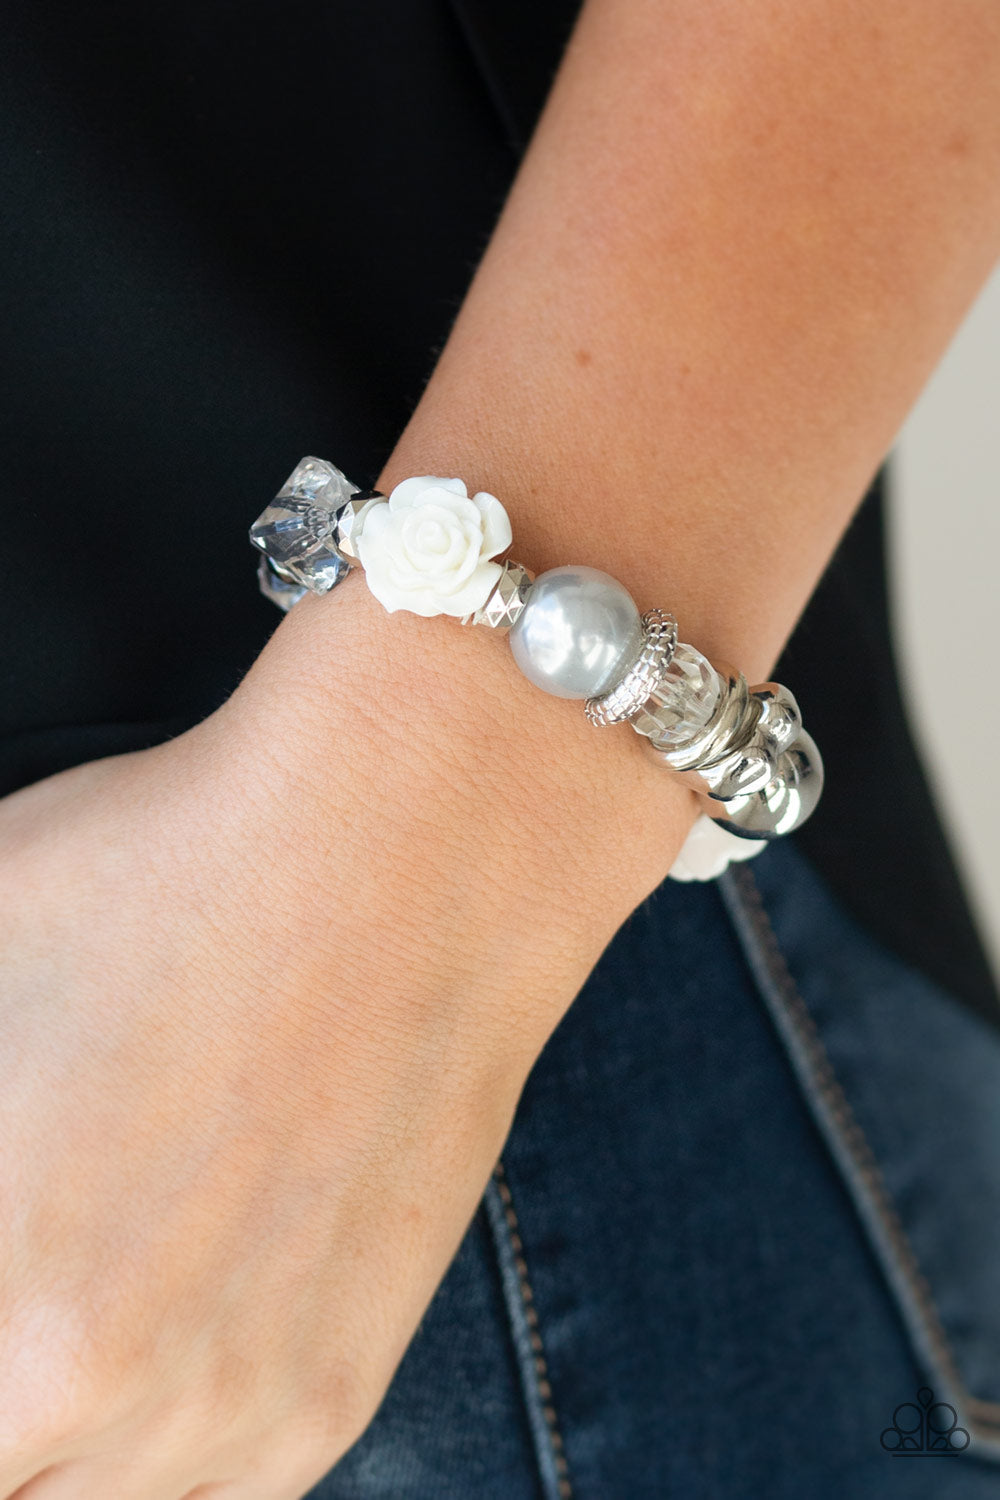 Paparazzi Here I Am - Silver - Pearl Beads - White Rose - Stretchy Bracelet - $5 Jewelry With Ashley Swint